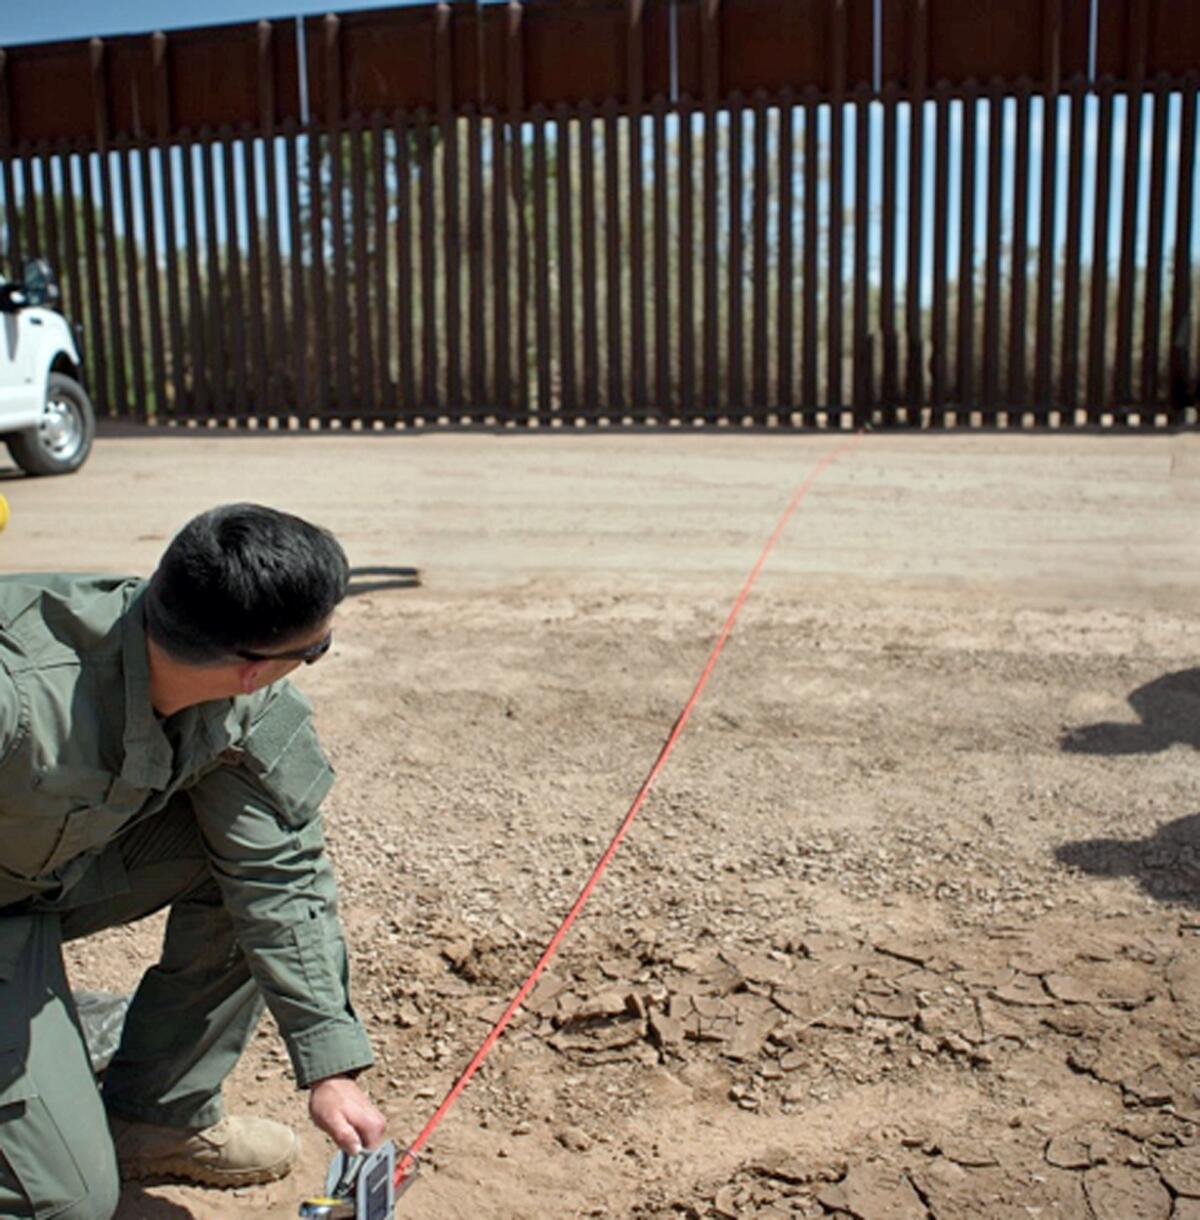 A Border Patrol agent shows the path of a tunnel that crosses the U.S.-Mexico border near Calexico. The passage extends about 60 feet into Mexico and at least 80 feet into the United States. (Associated Press)